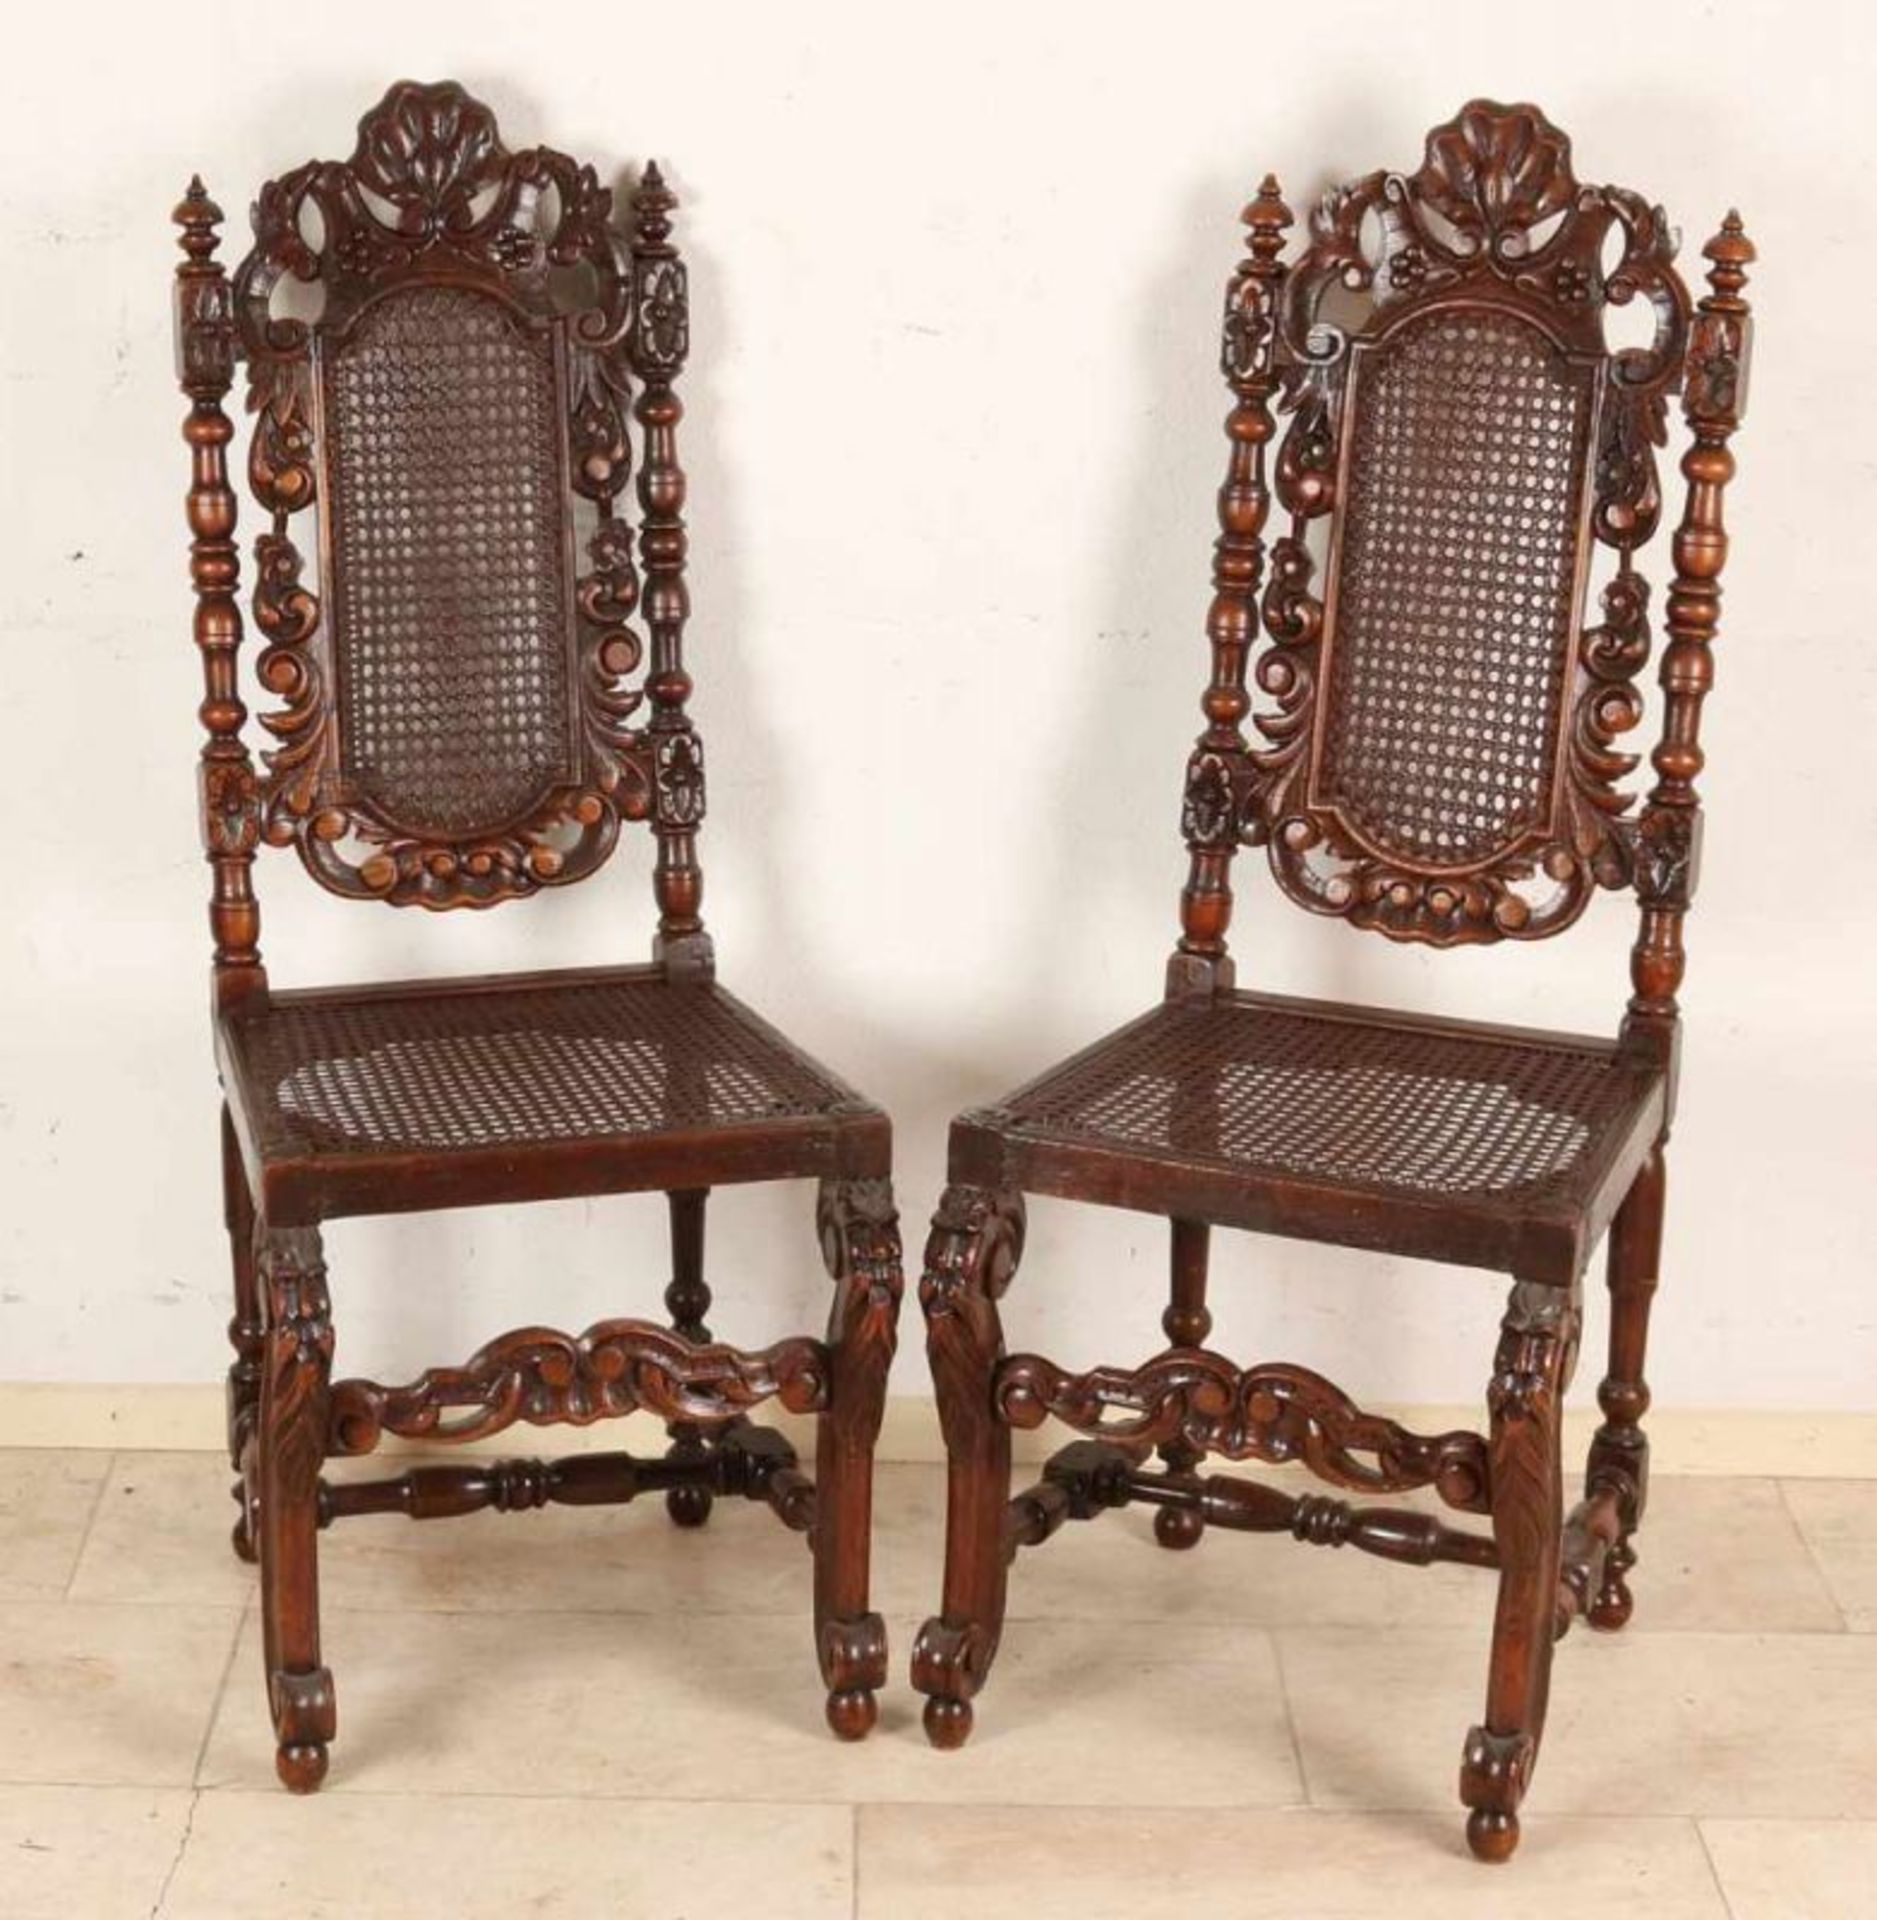 Six antique French oak Neo Renaissance stabbed chairs with wicker. Fratsen tendrils and on the legs. - Image 2 of 3